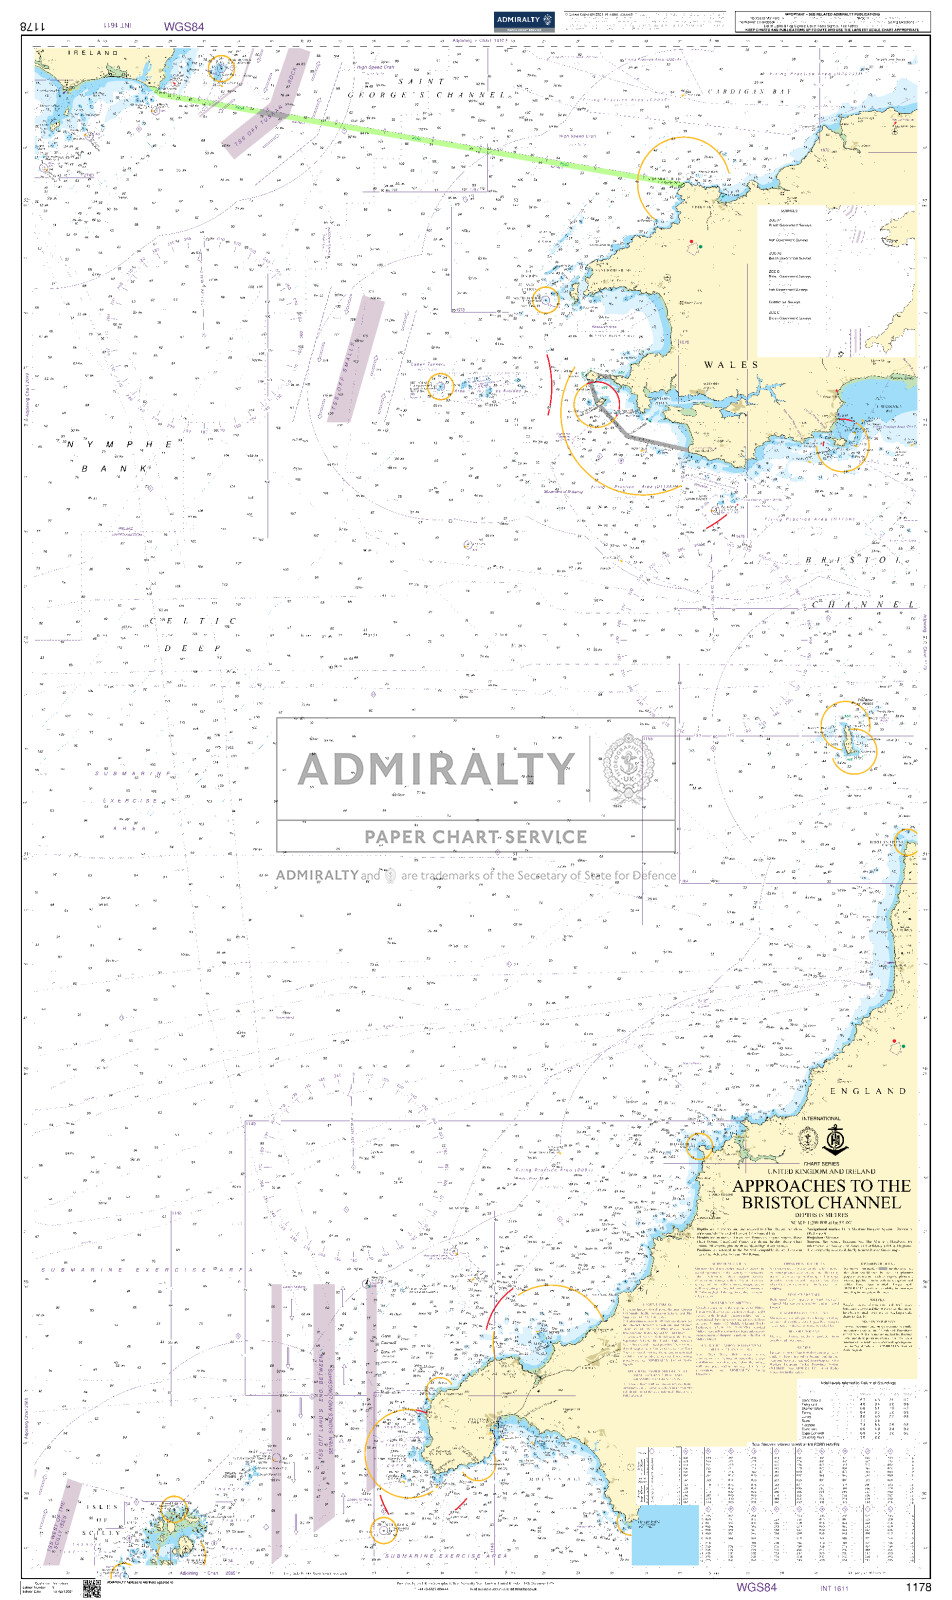 Approaches to the Bristol Channel. UKHO1178